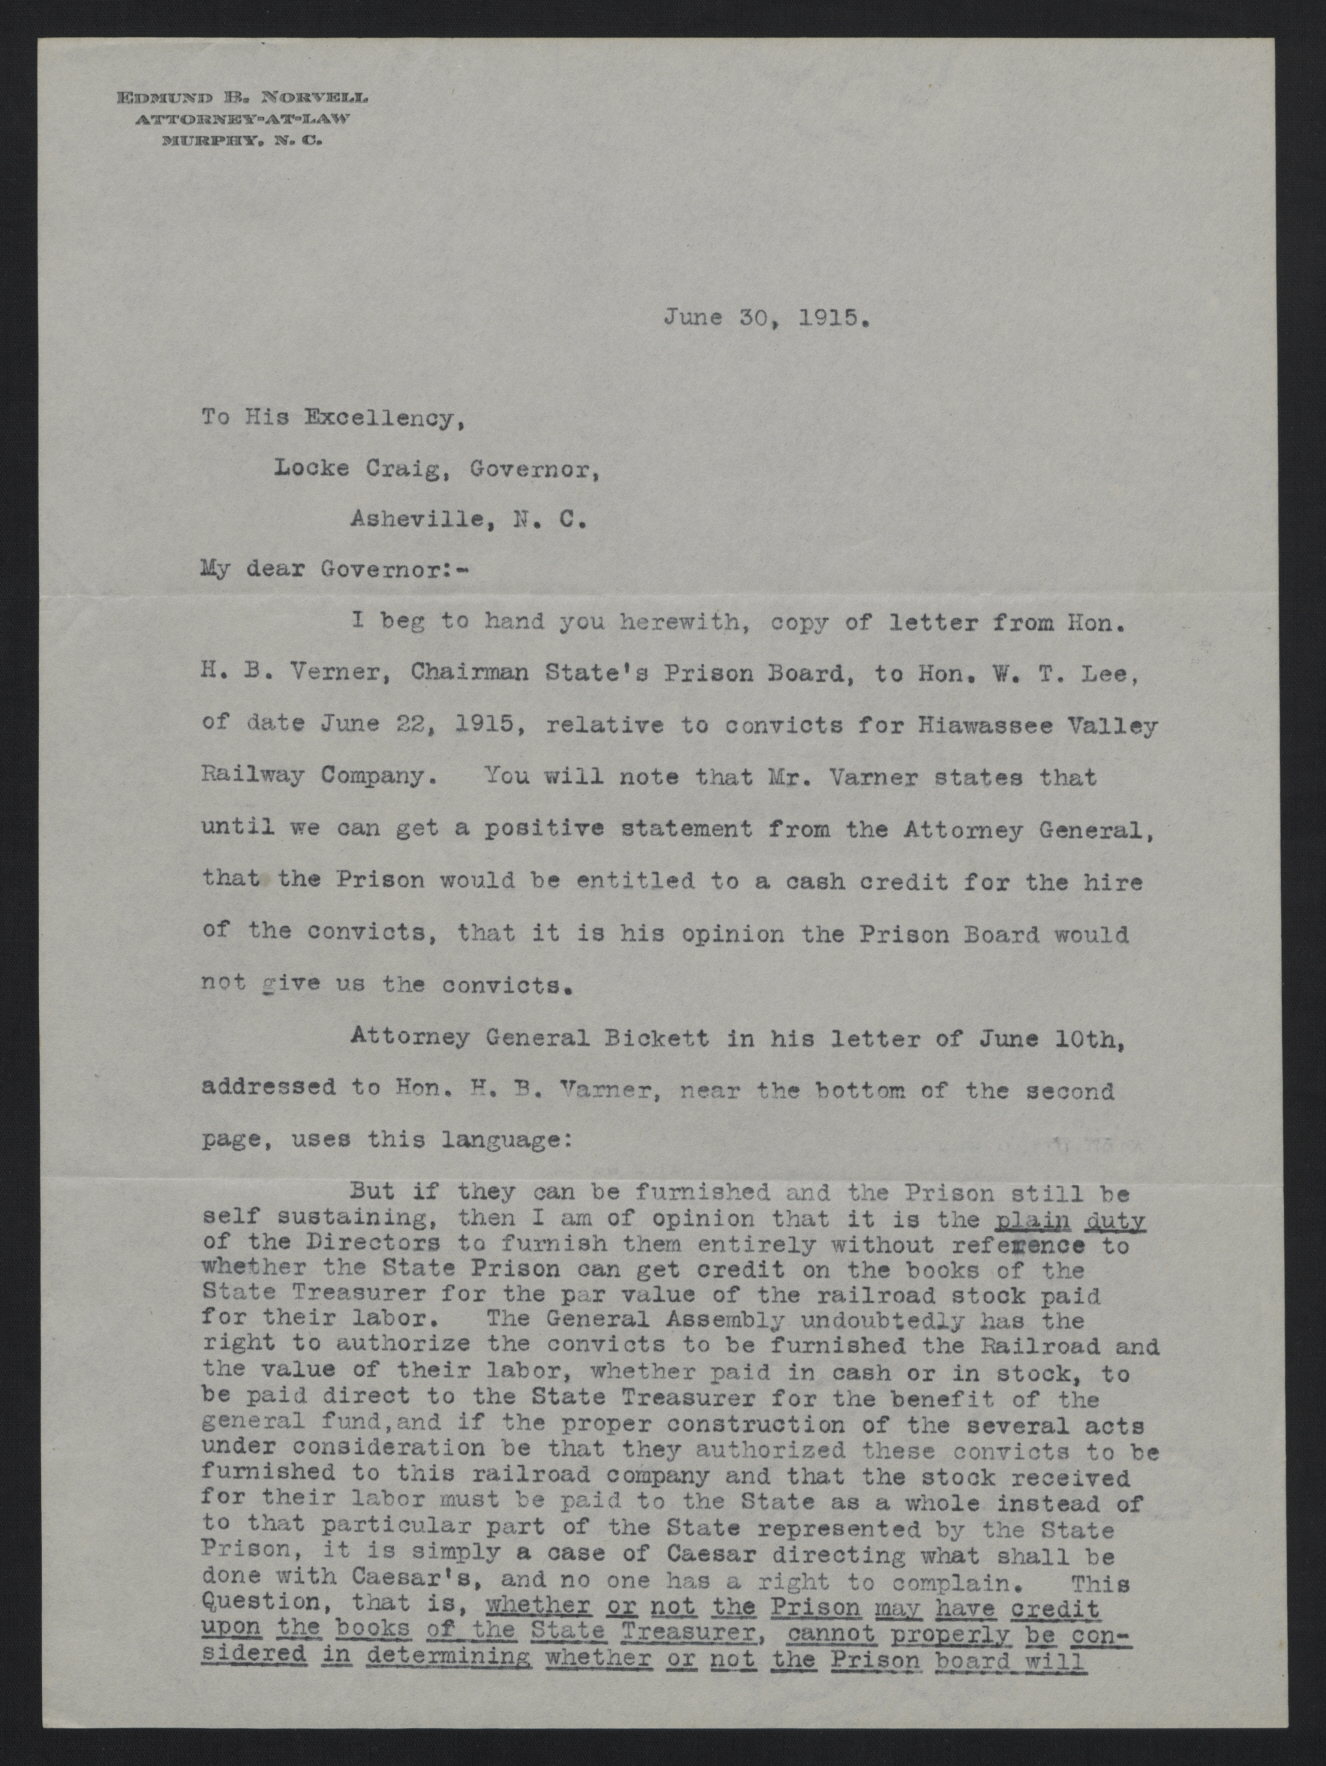 Letter from Norvell to Craig, June 30, 1915, page 1